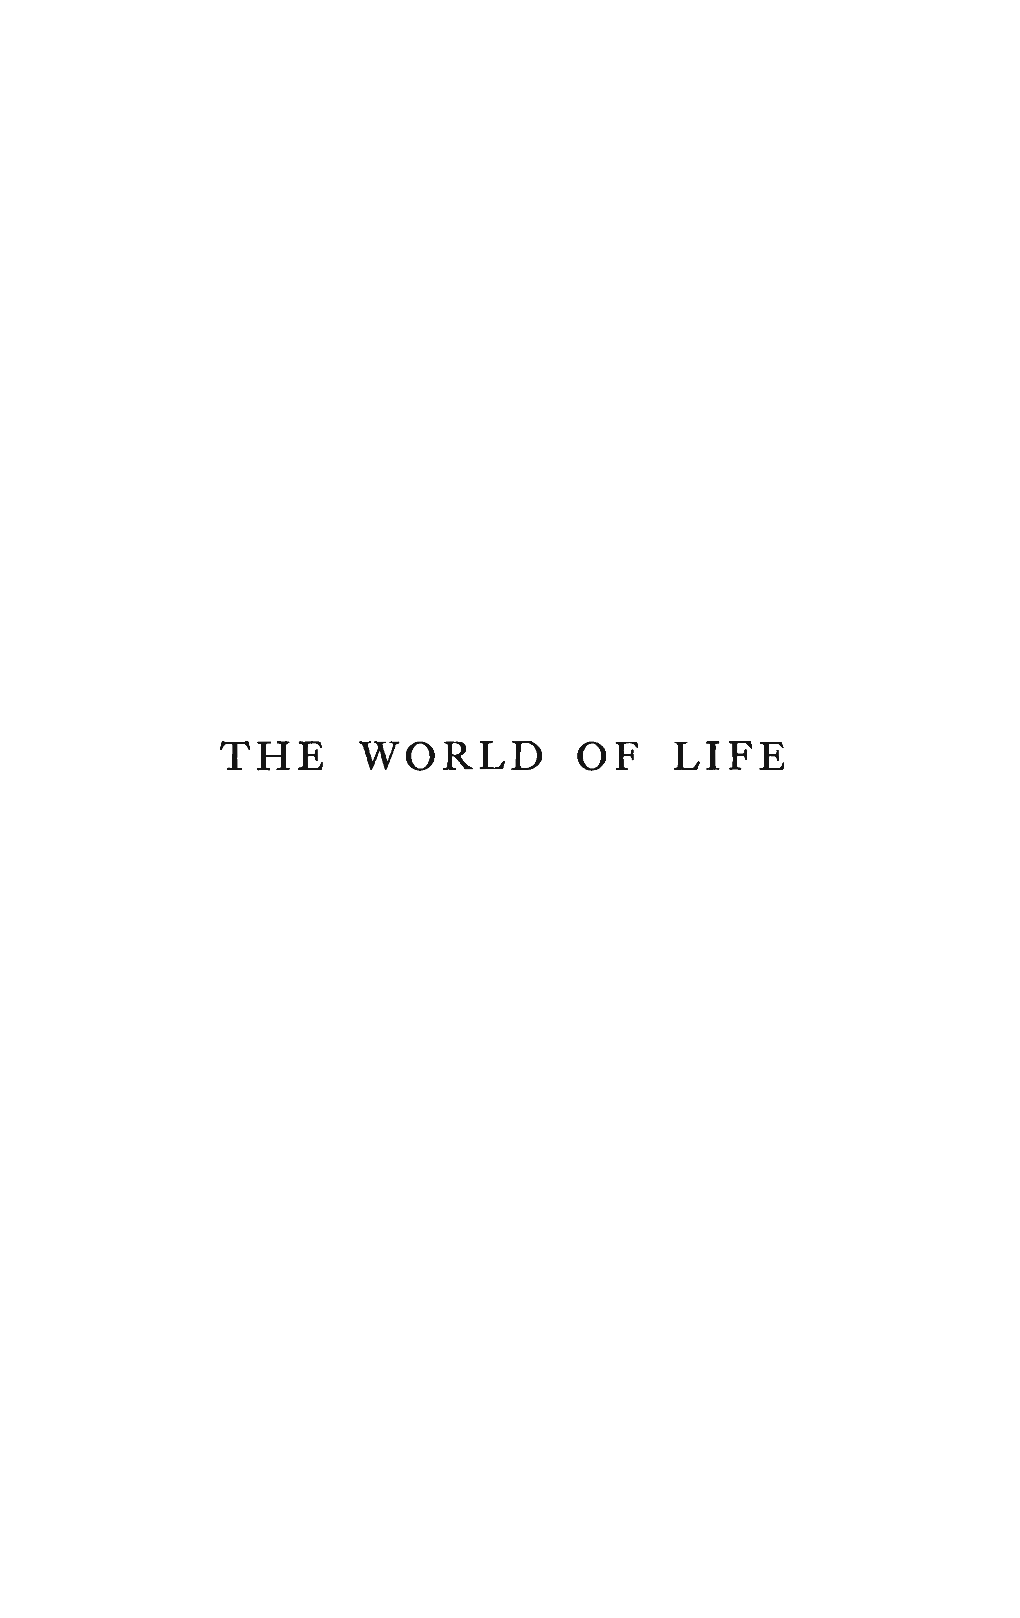 The World of Life